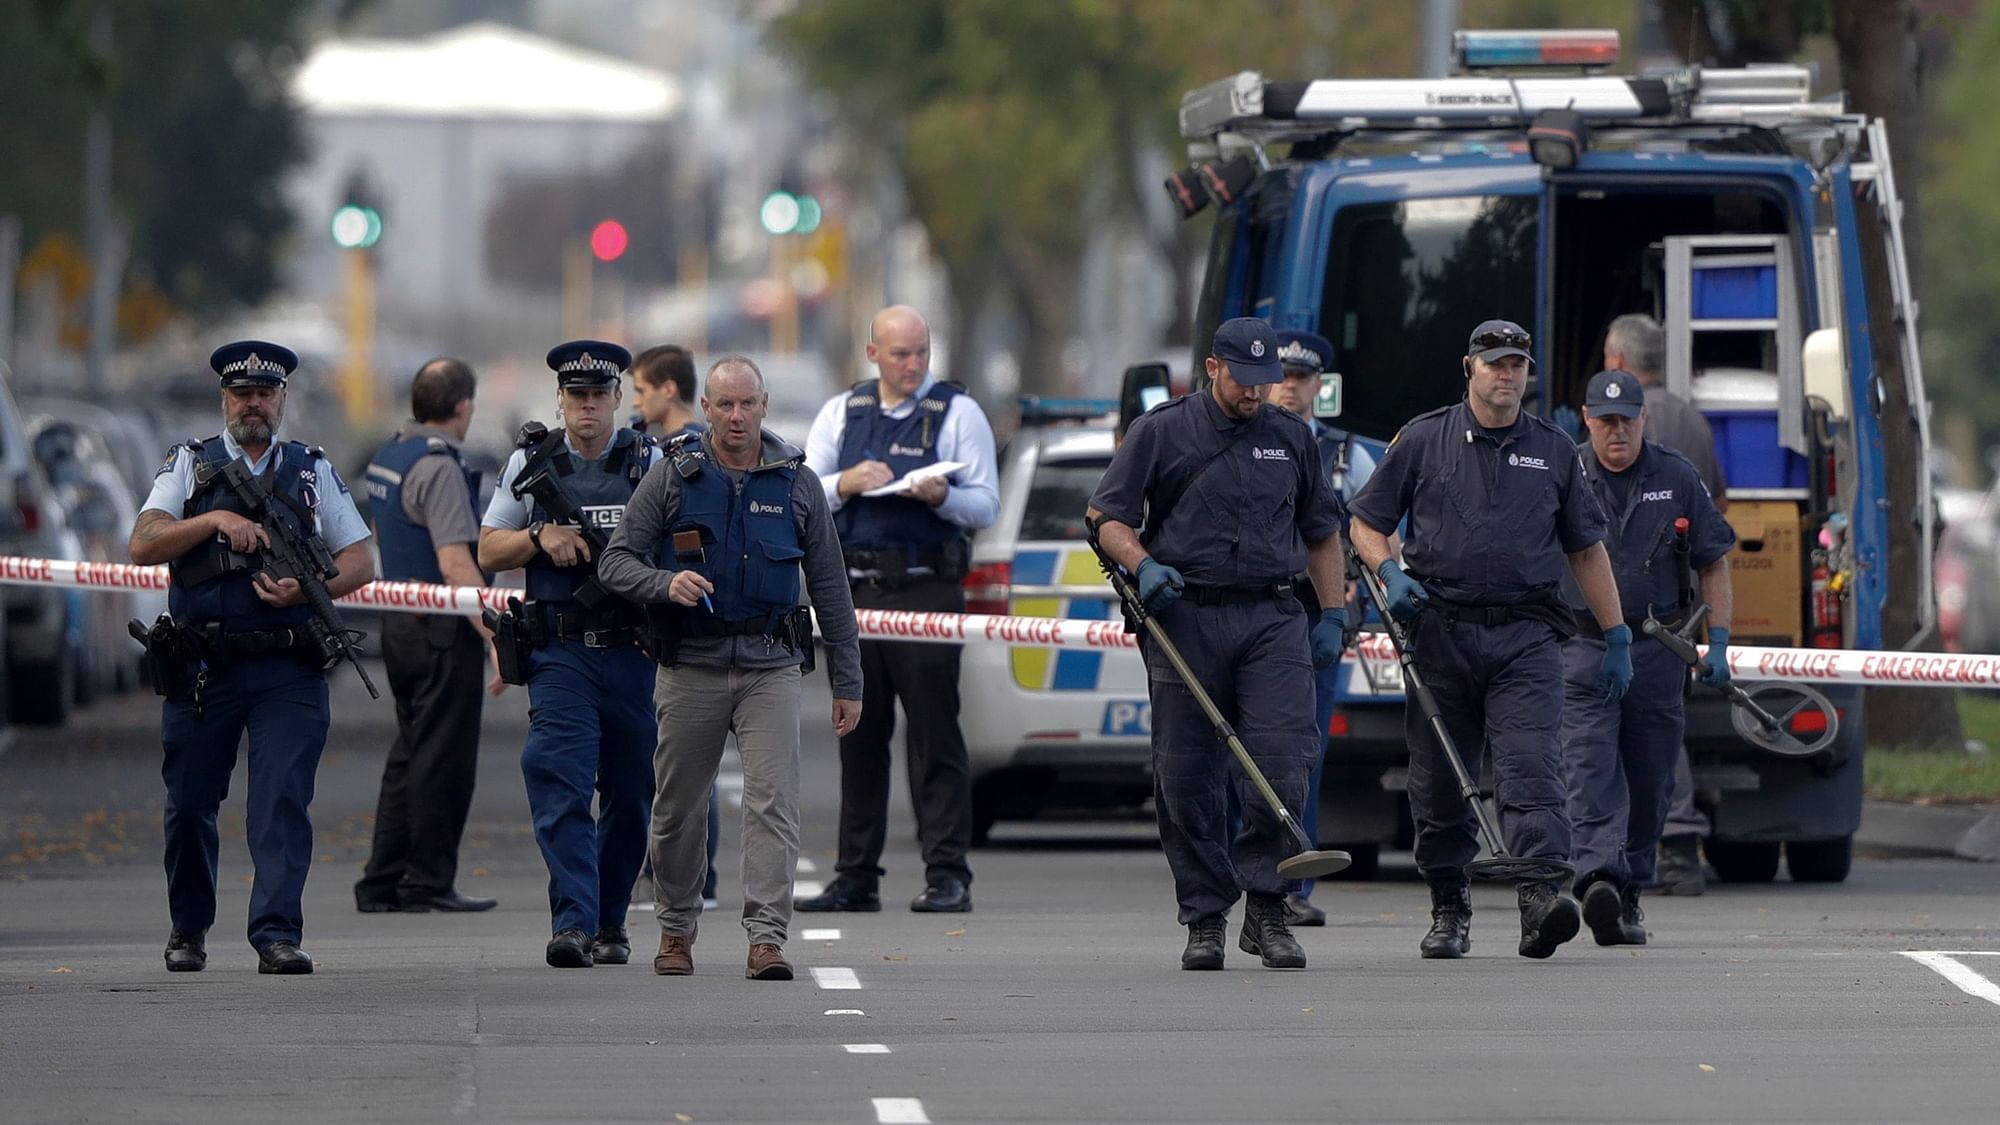 At least 40 people have died in the two mass shootings at two mosques in the New Zealand city of Christchurch.